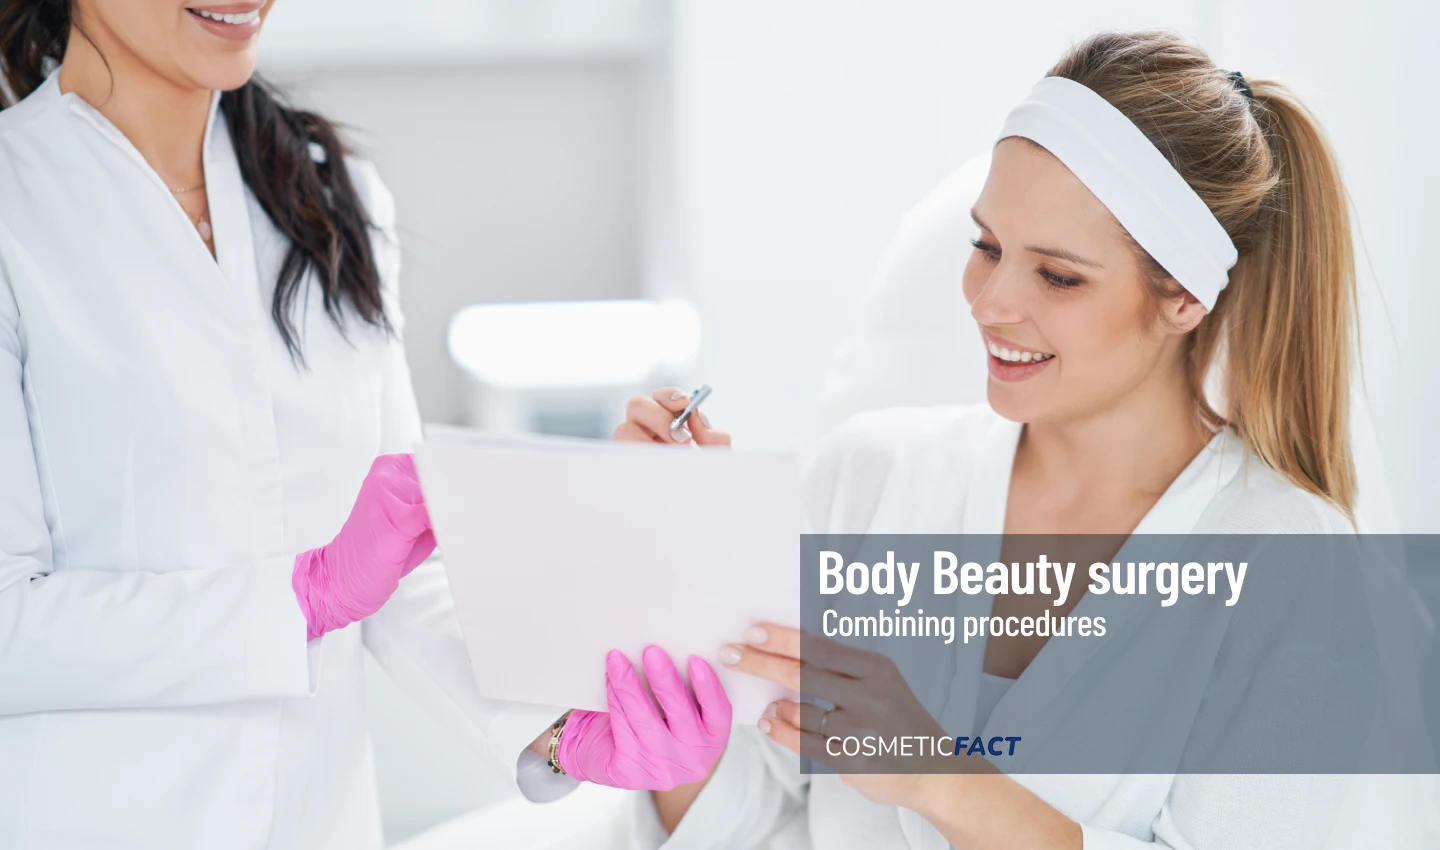 A patient and her doctor look at a laptop screen, discussing body cosmetic surgery and facial procedures.